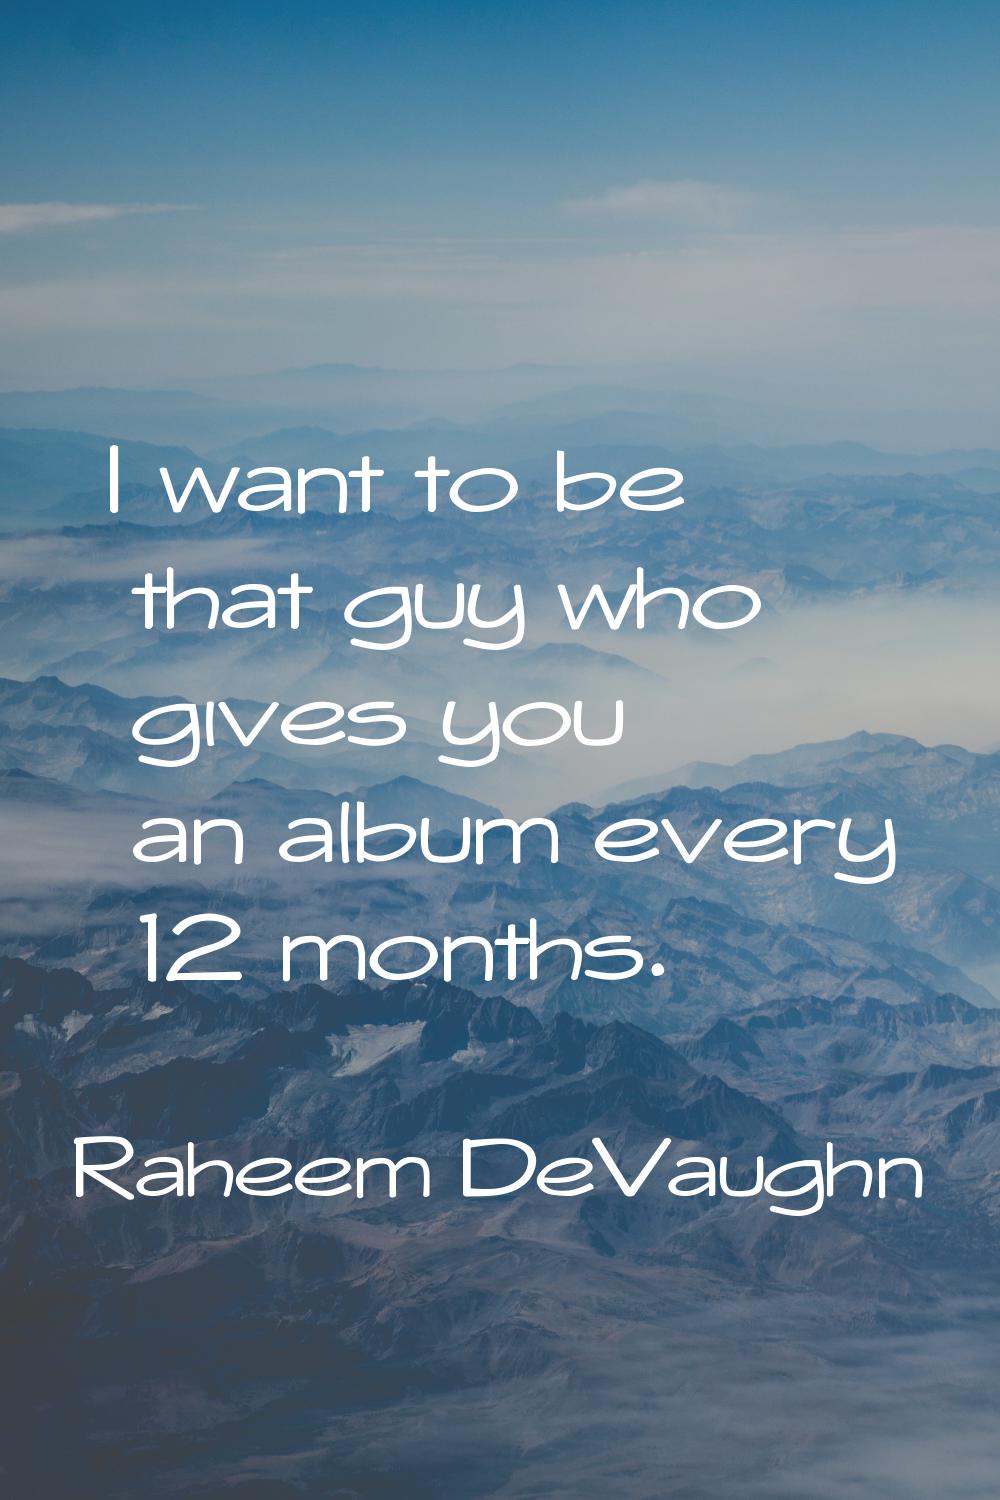 I want to be that guy who gives you an album every 12 months.